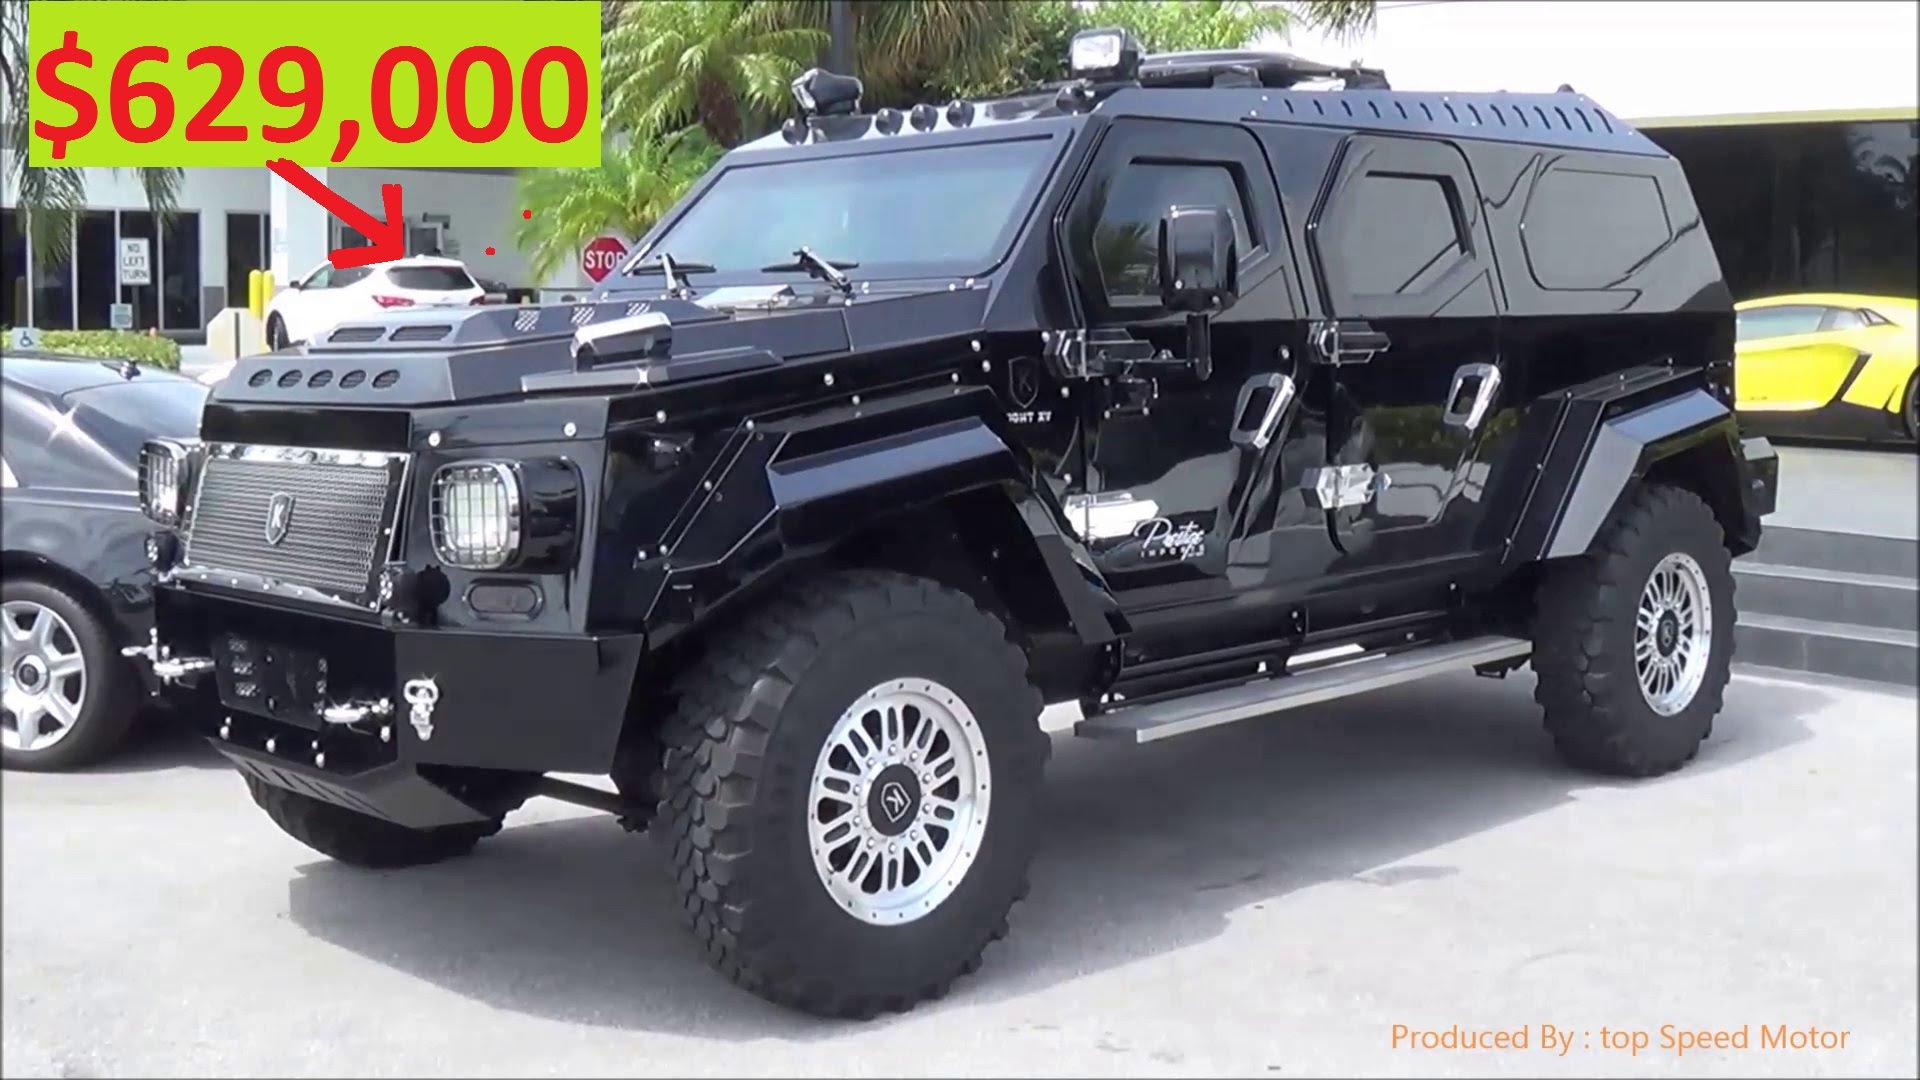 KNIGHT XV The World's Most Luxurious Armored Vehicle $629,000